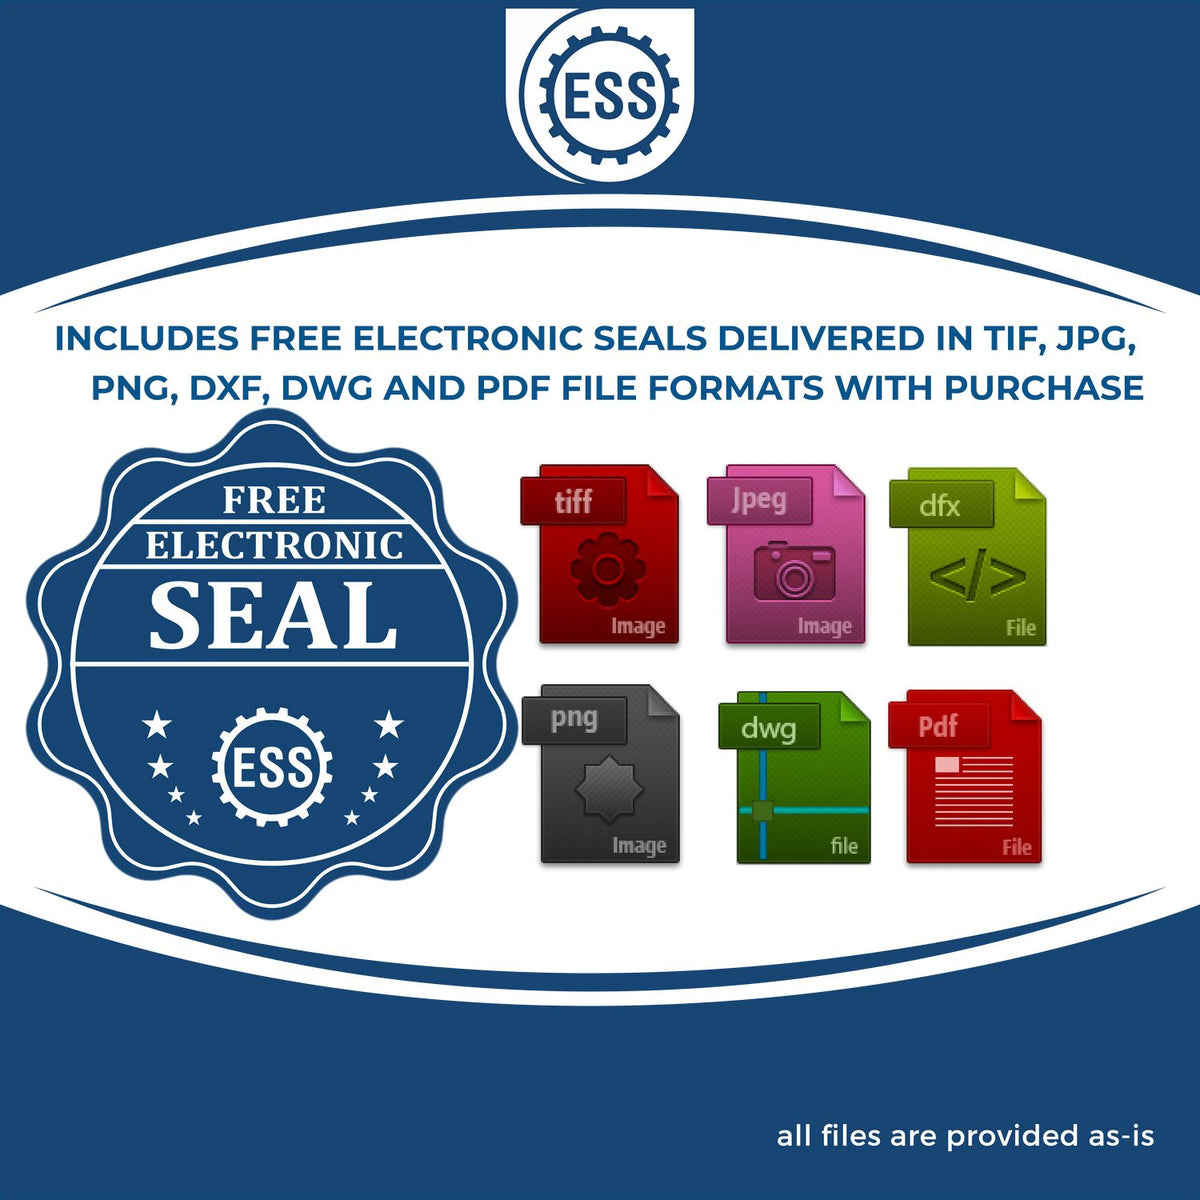 An infographic for the free electronic seal for the Extended Long Reach Nevada Architect Seal Embosser illustrating the different file type icons such as DXF, DWG, TIF, JPG and PNG.